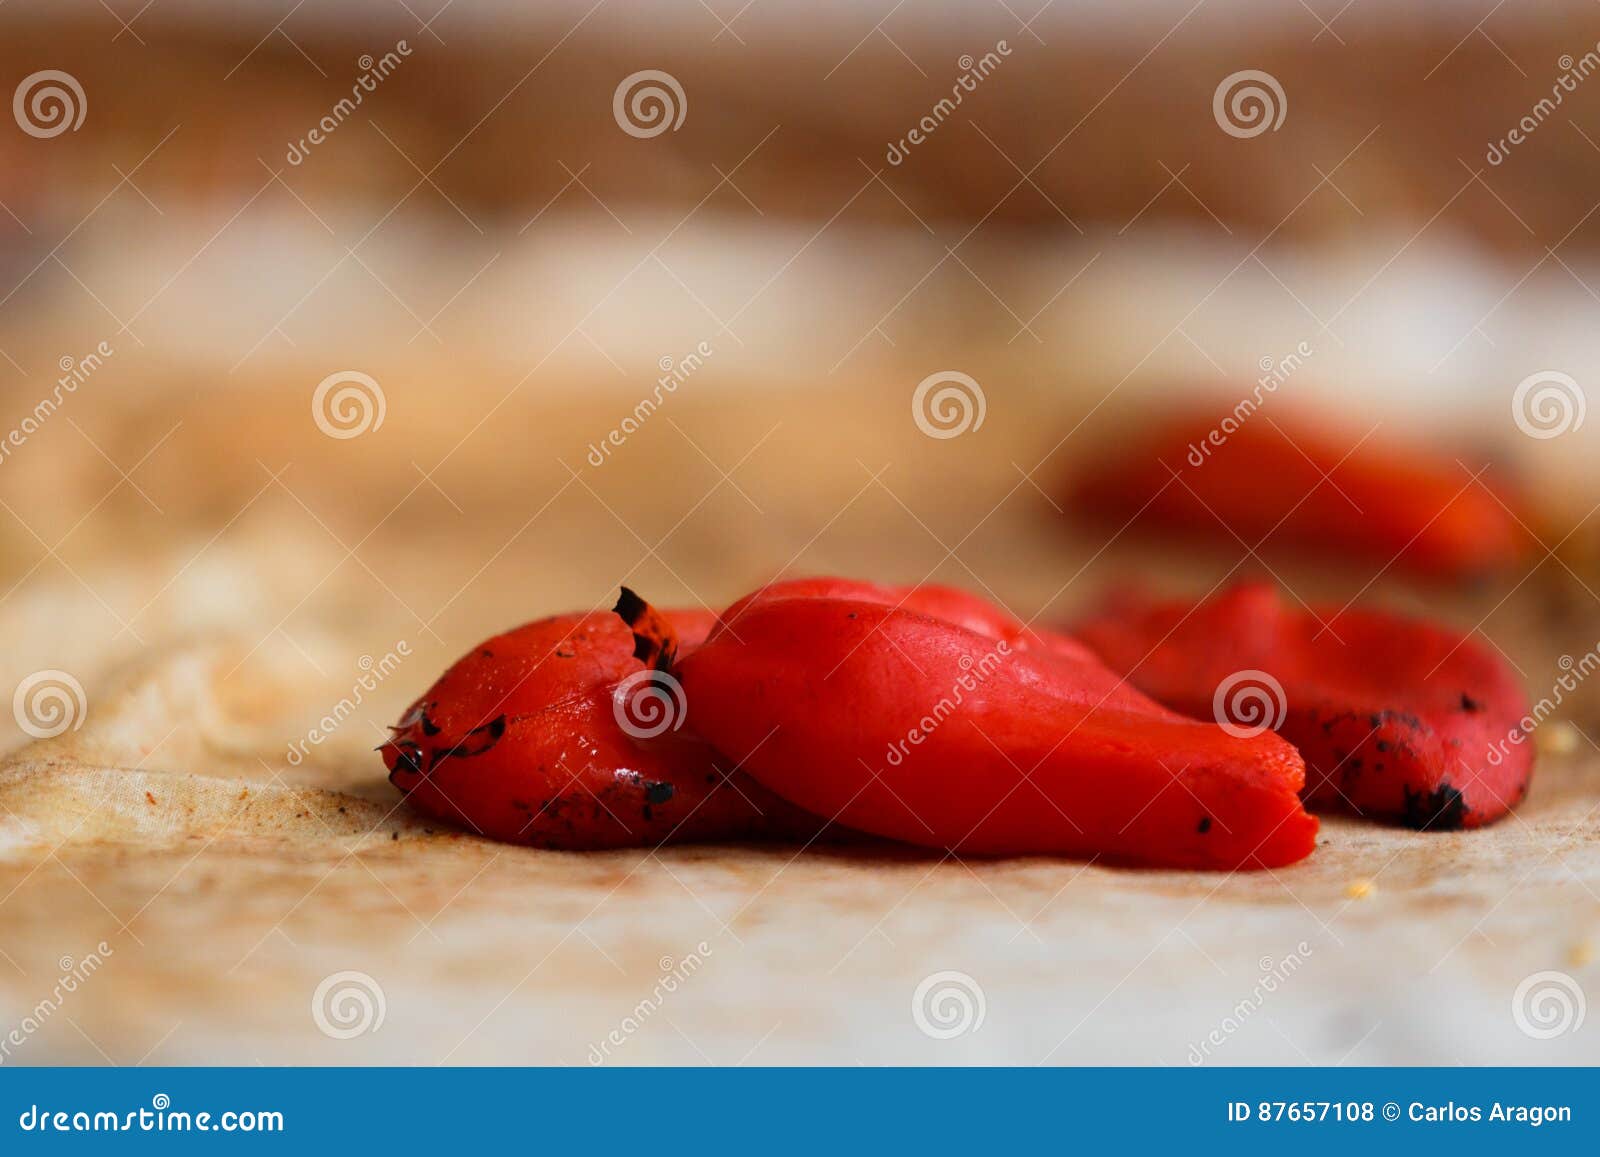 closeup of a pile of freshly baked piquillo peppers on a rag, in lodosa